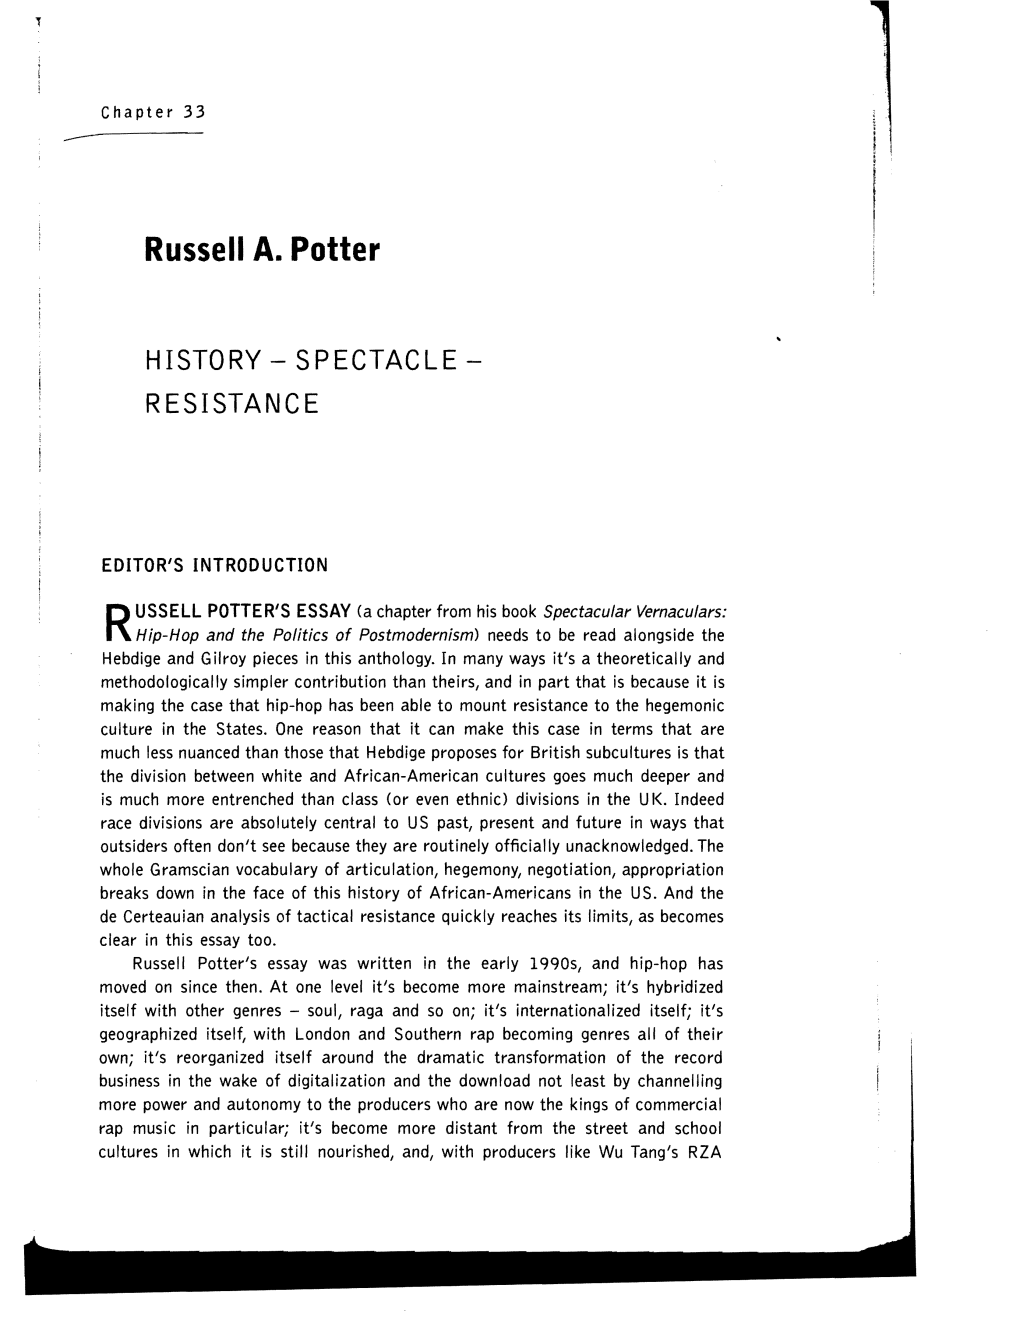 Russell A. Potter HISTORY